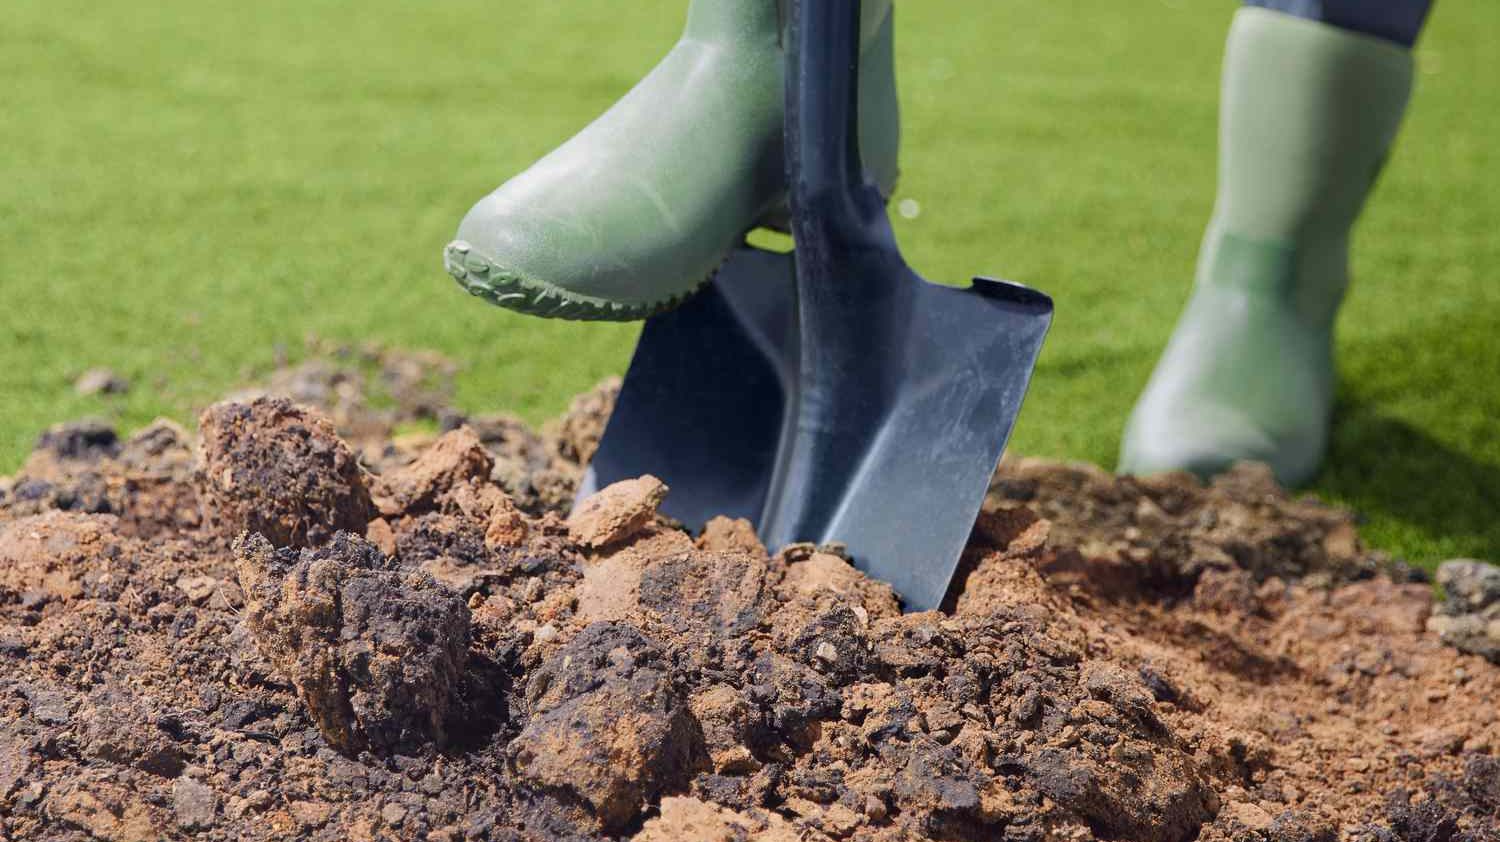 A person engaging in garden design, digging in the dirt with a shovel.